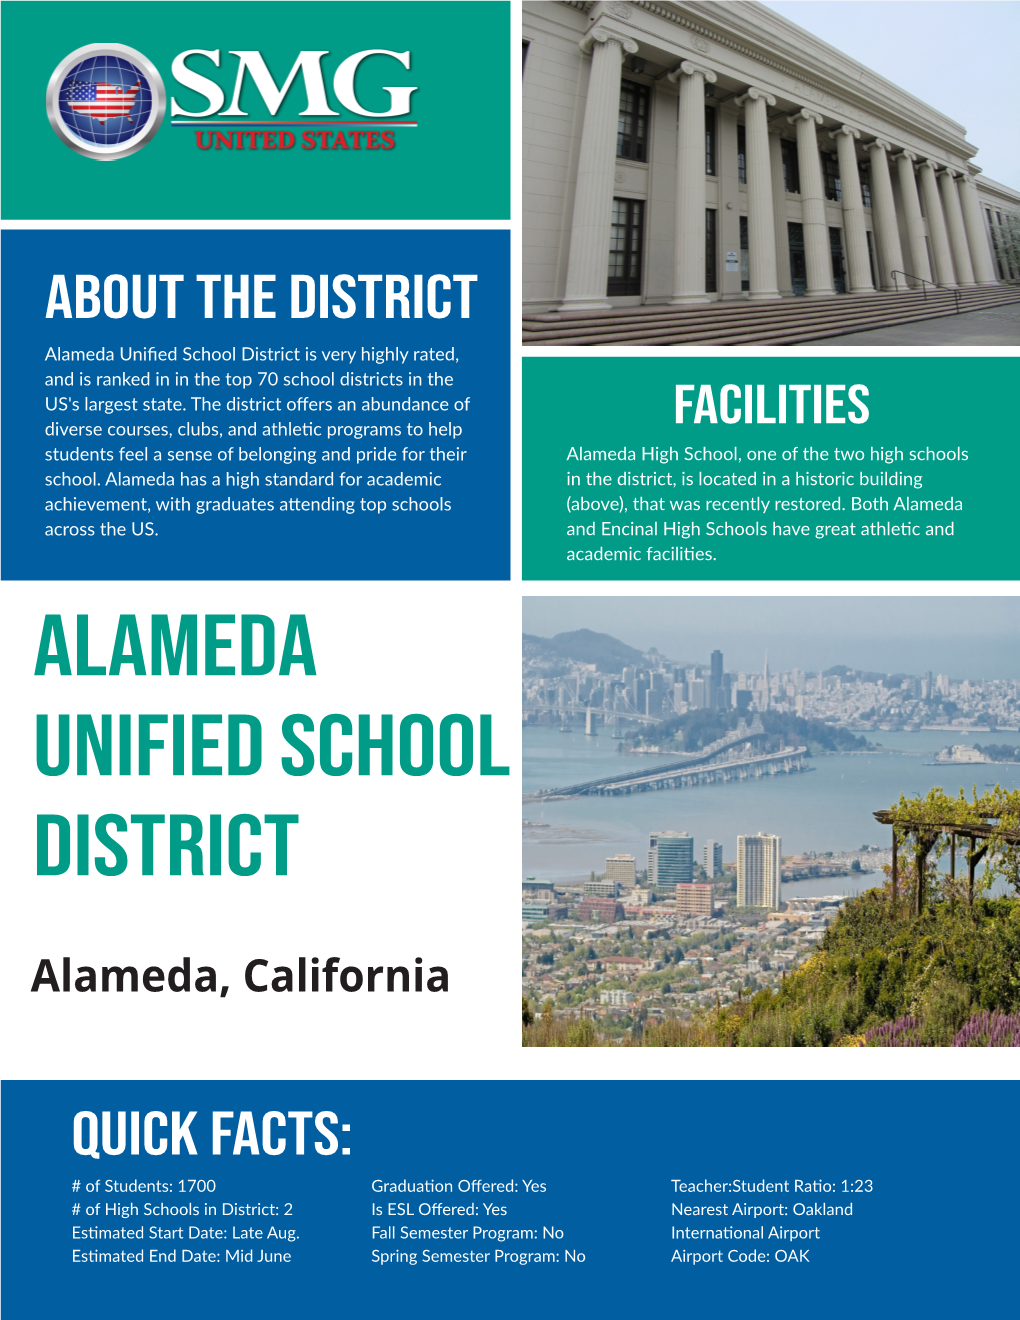 Alameda Unified School District Is Very Highly Rated, and Is Ranked in in the Top 70 School Districts in the US's Largest State